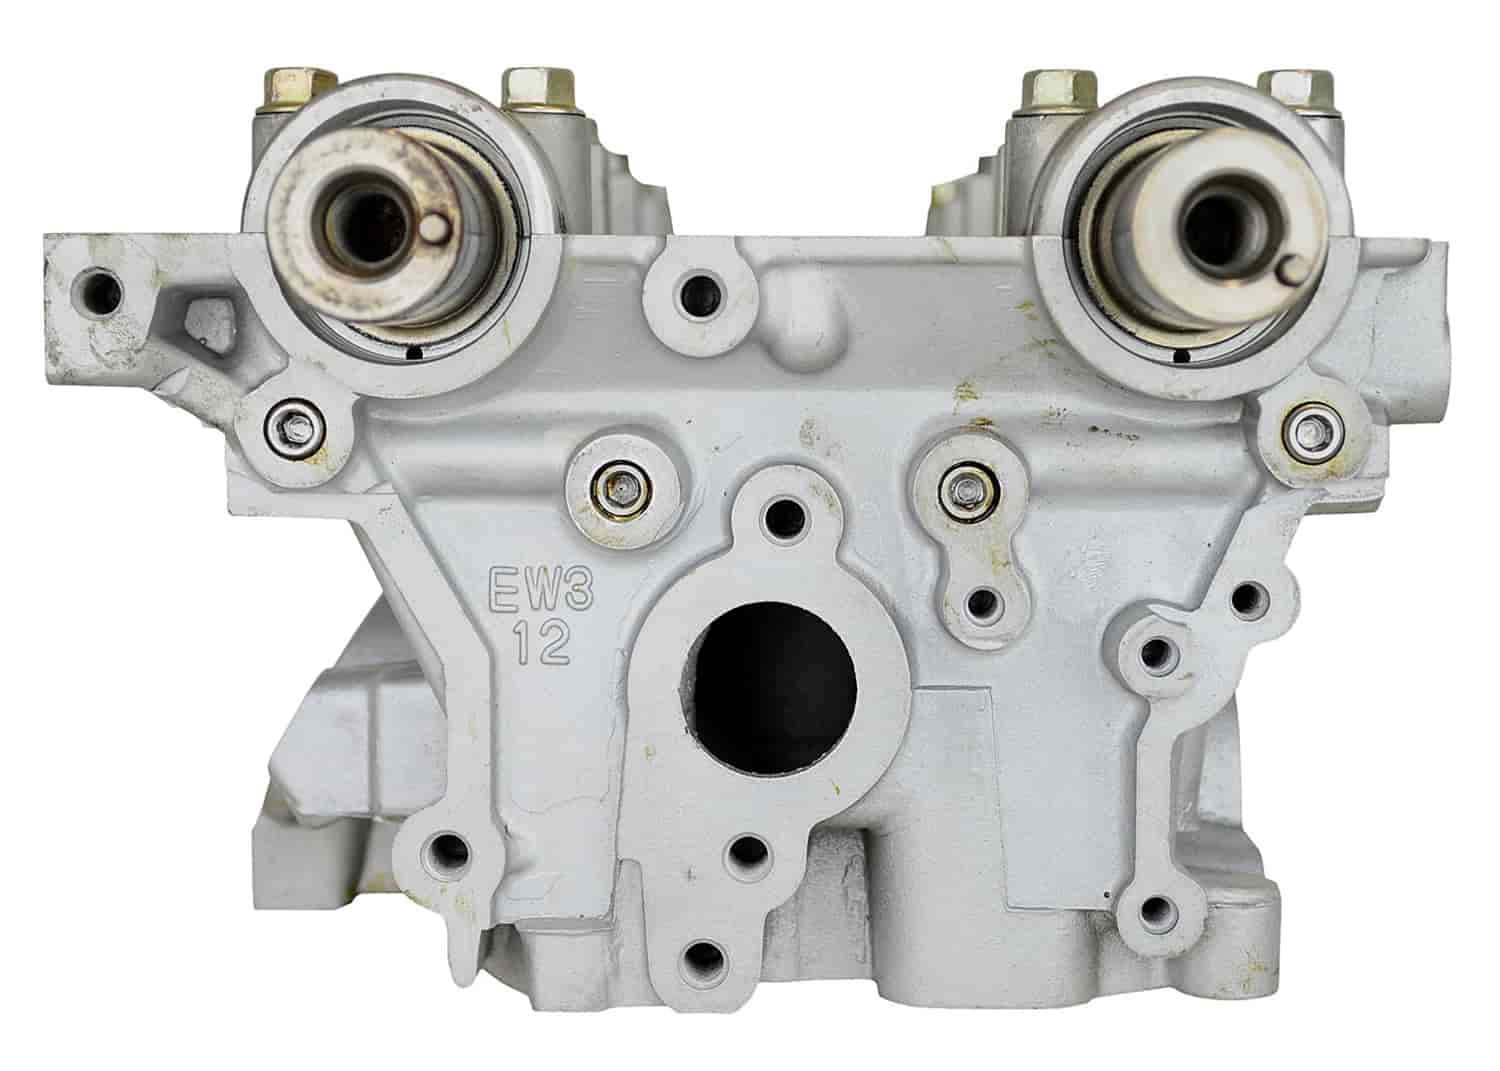 Remanufactured Cylinder Head for 2002-2006 Hyundai/Kia with 3.5L